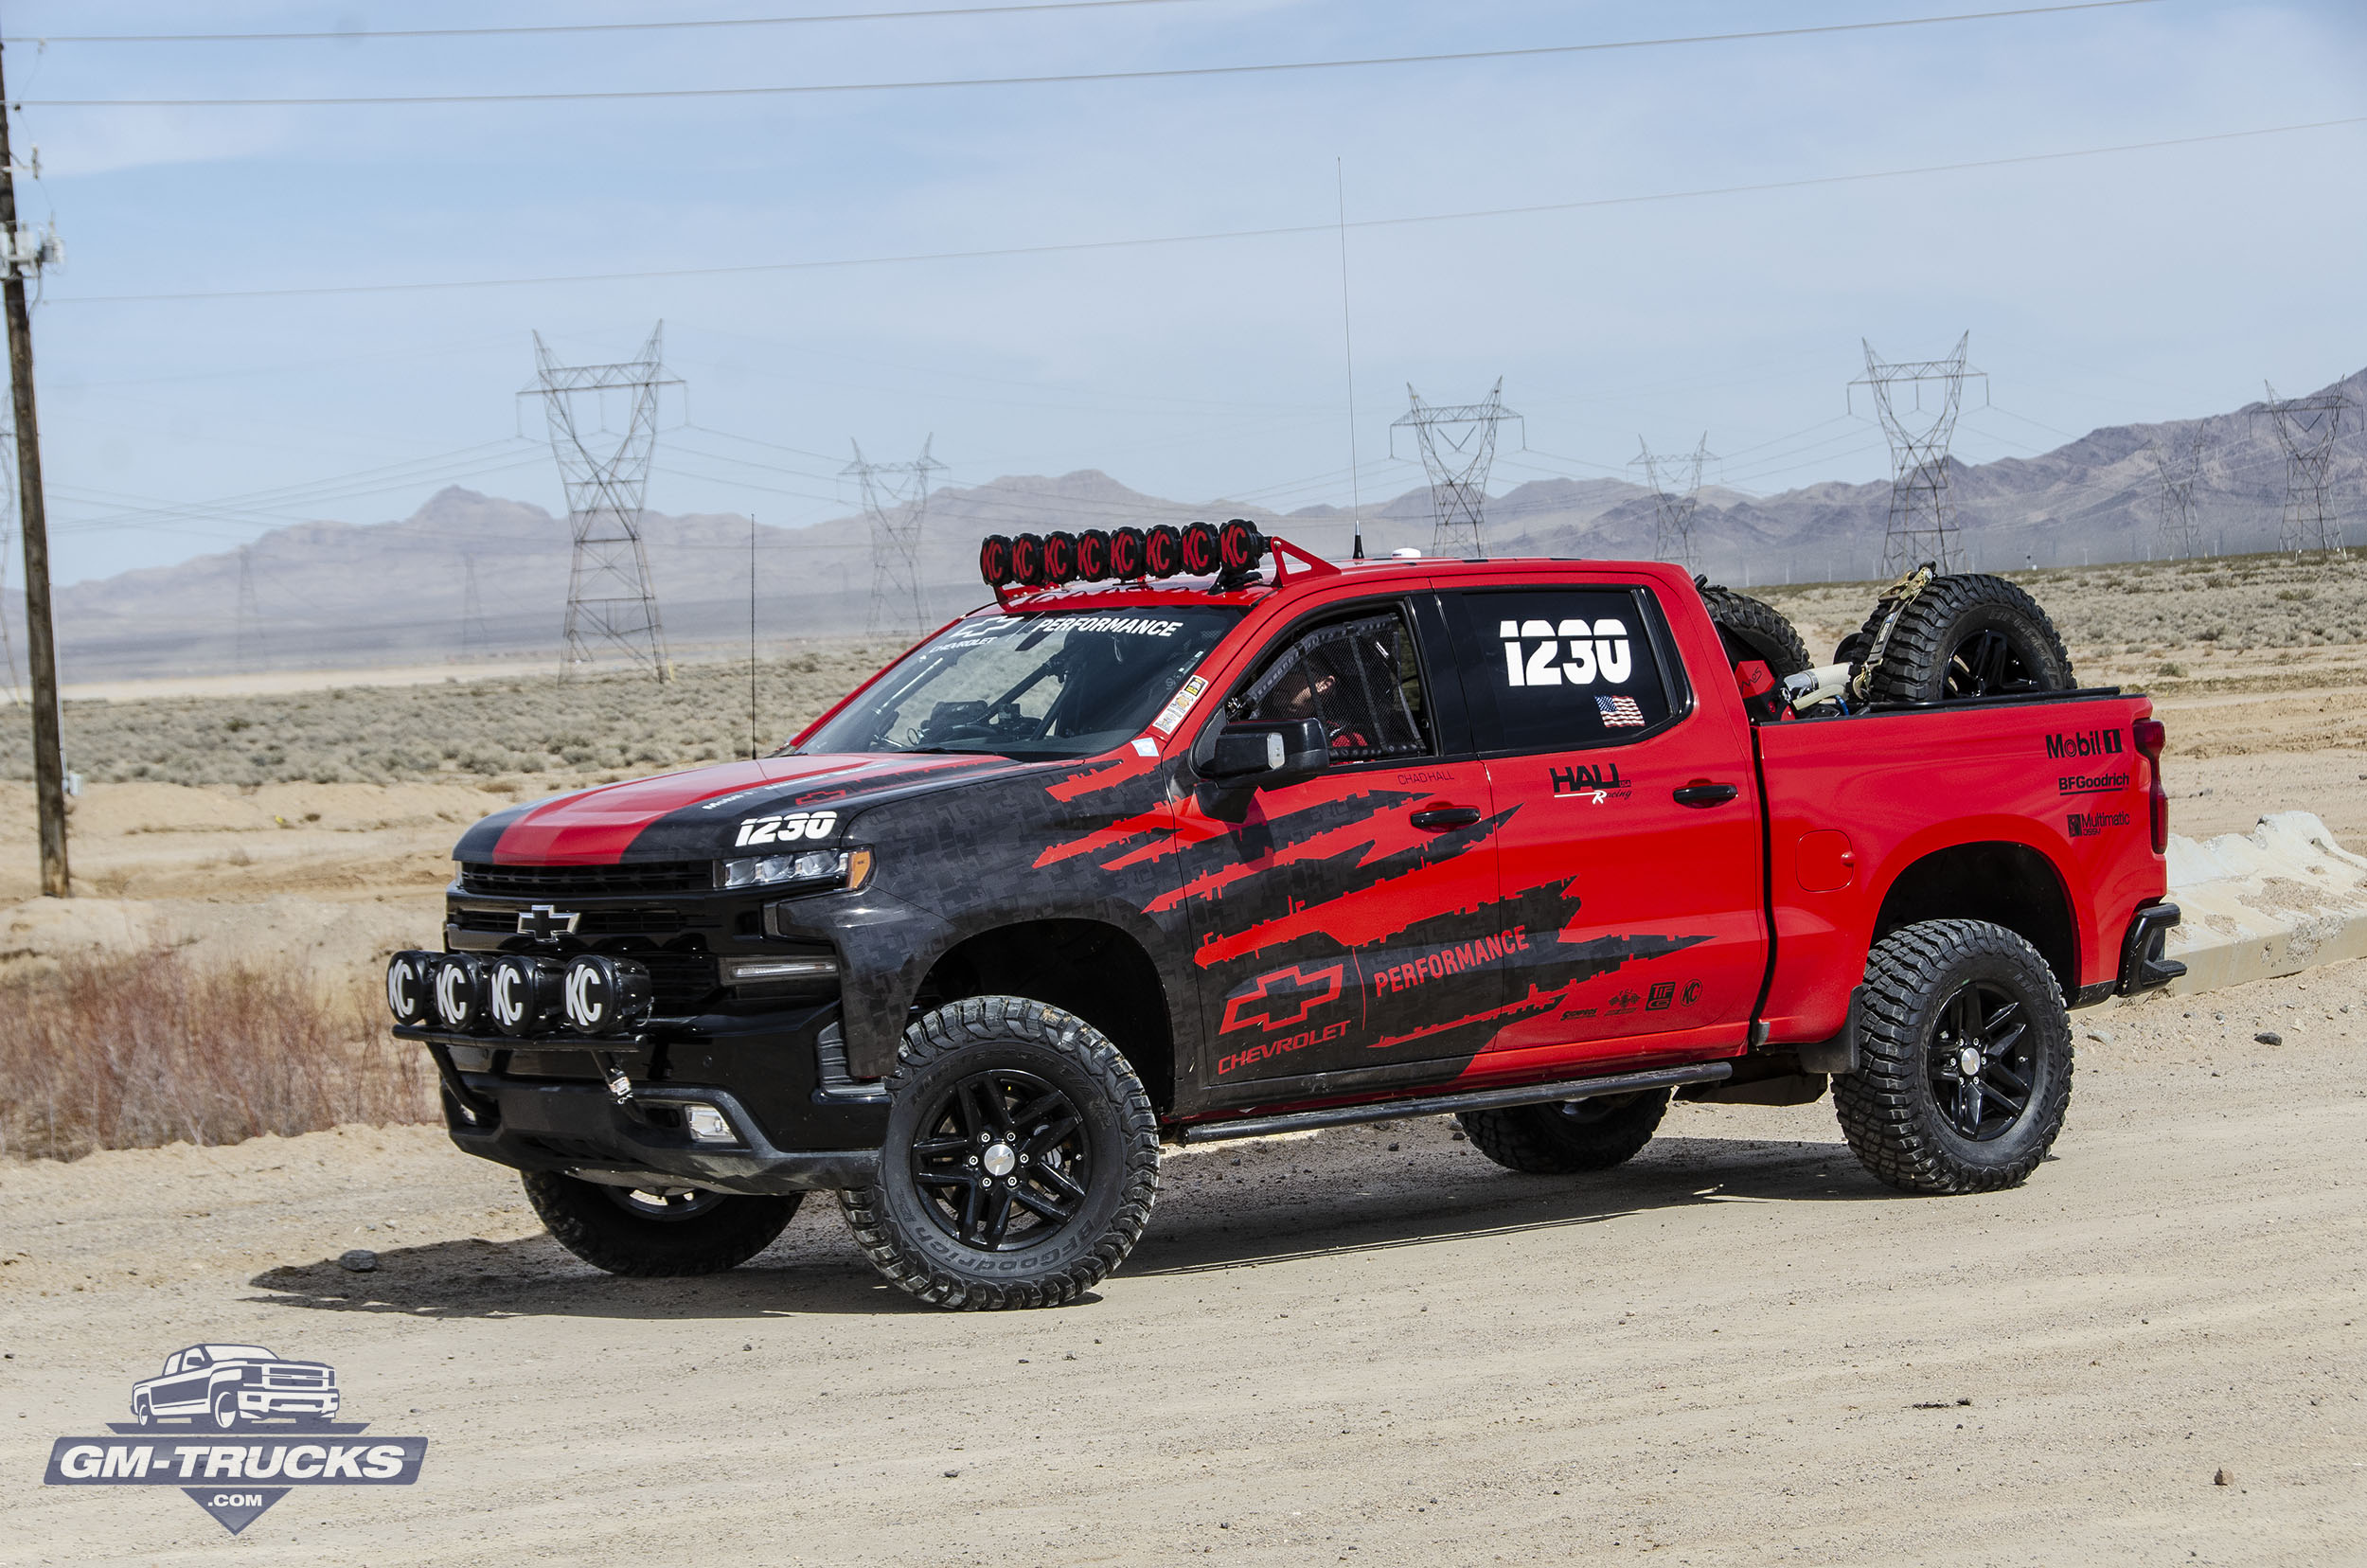 The Chevrolet Performance Hall Racing Silverado At The 2020 Mint 400